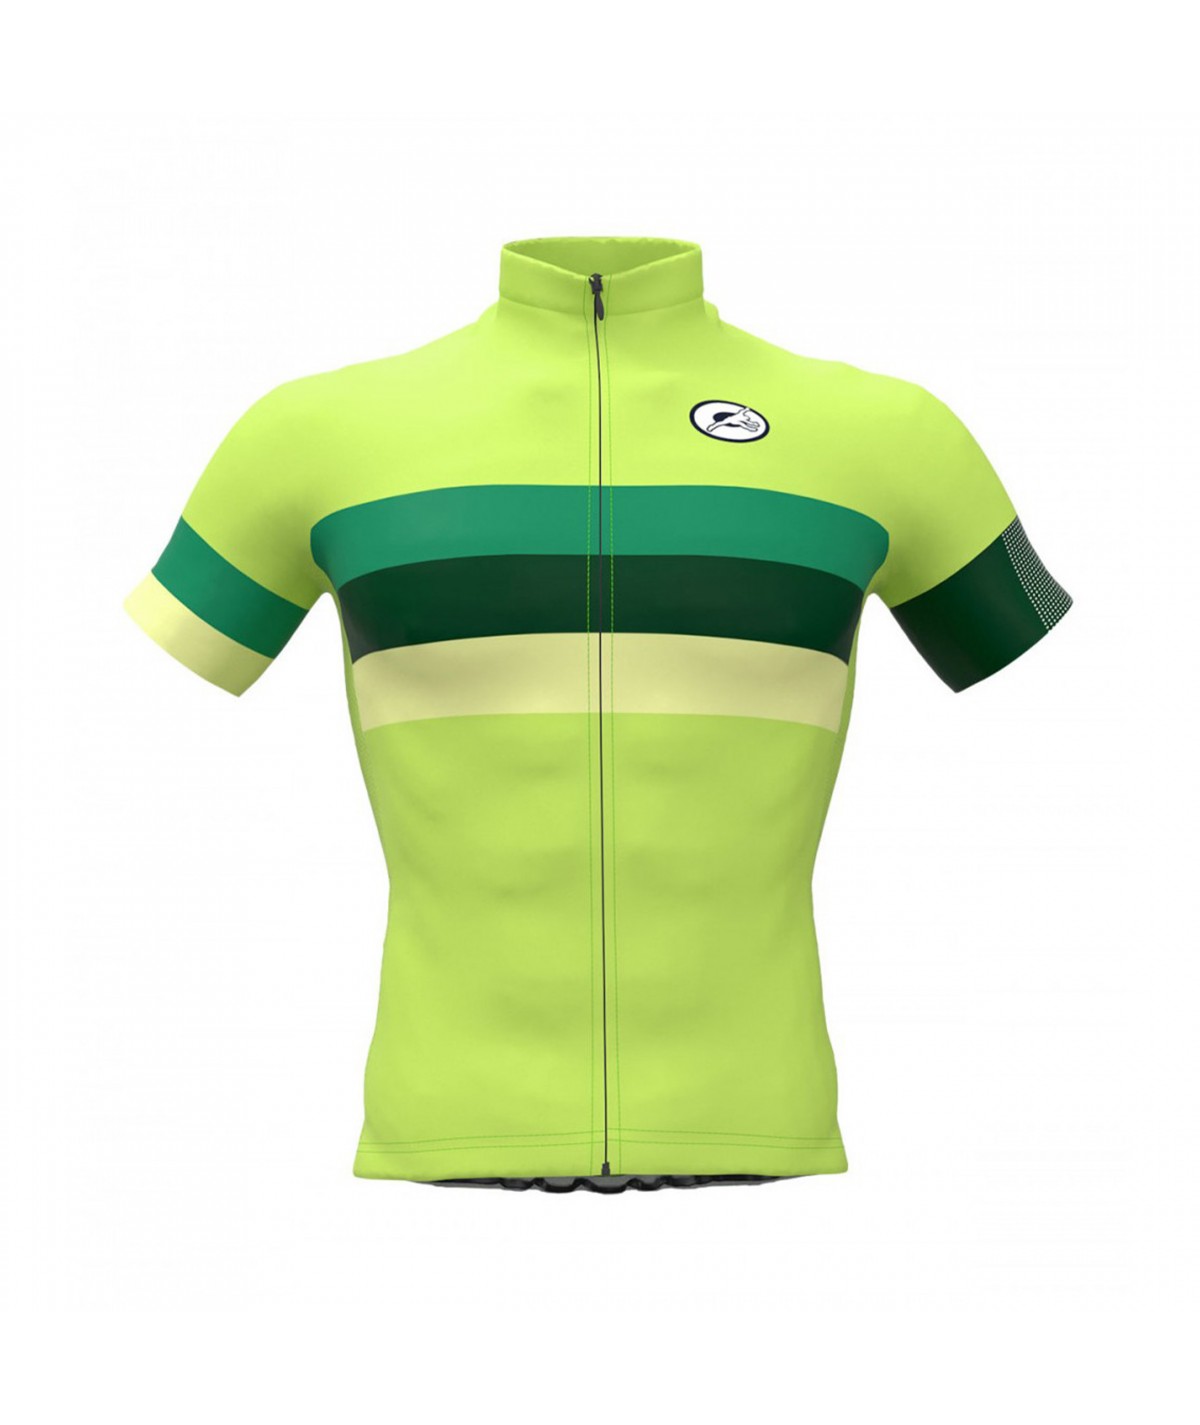 POM summer cycling jersey